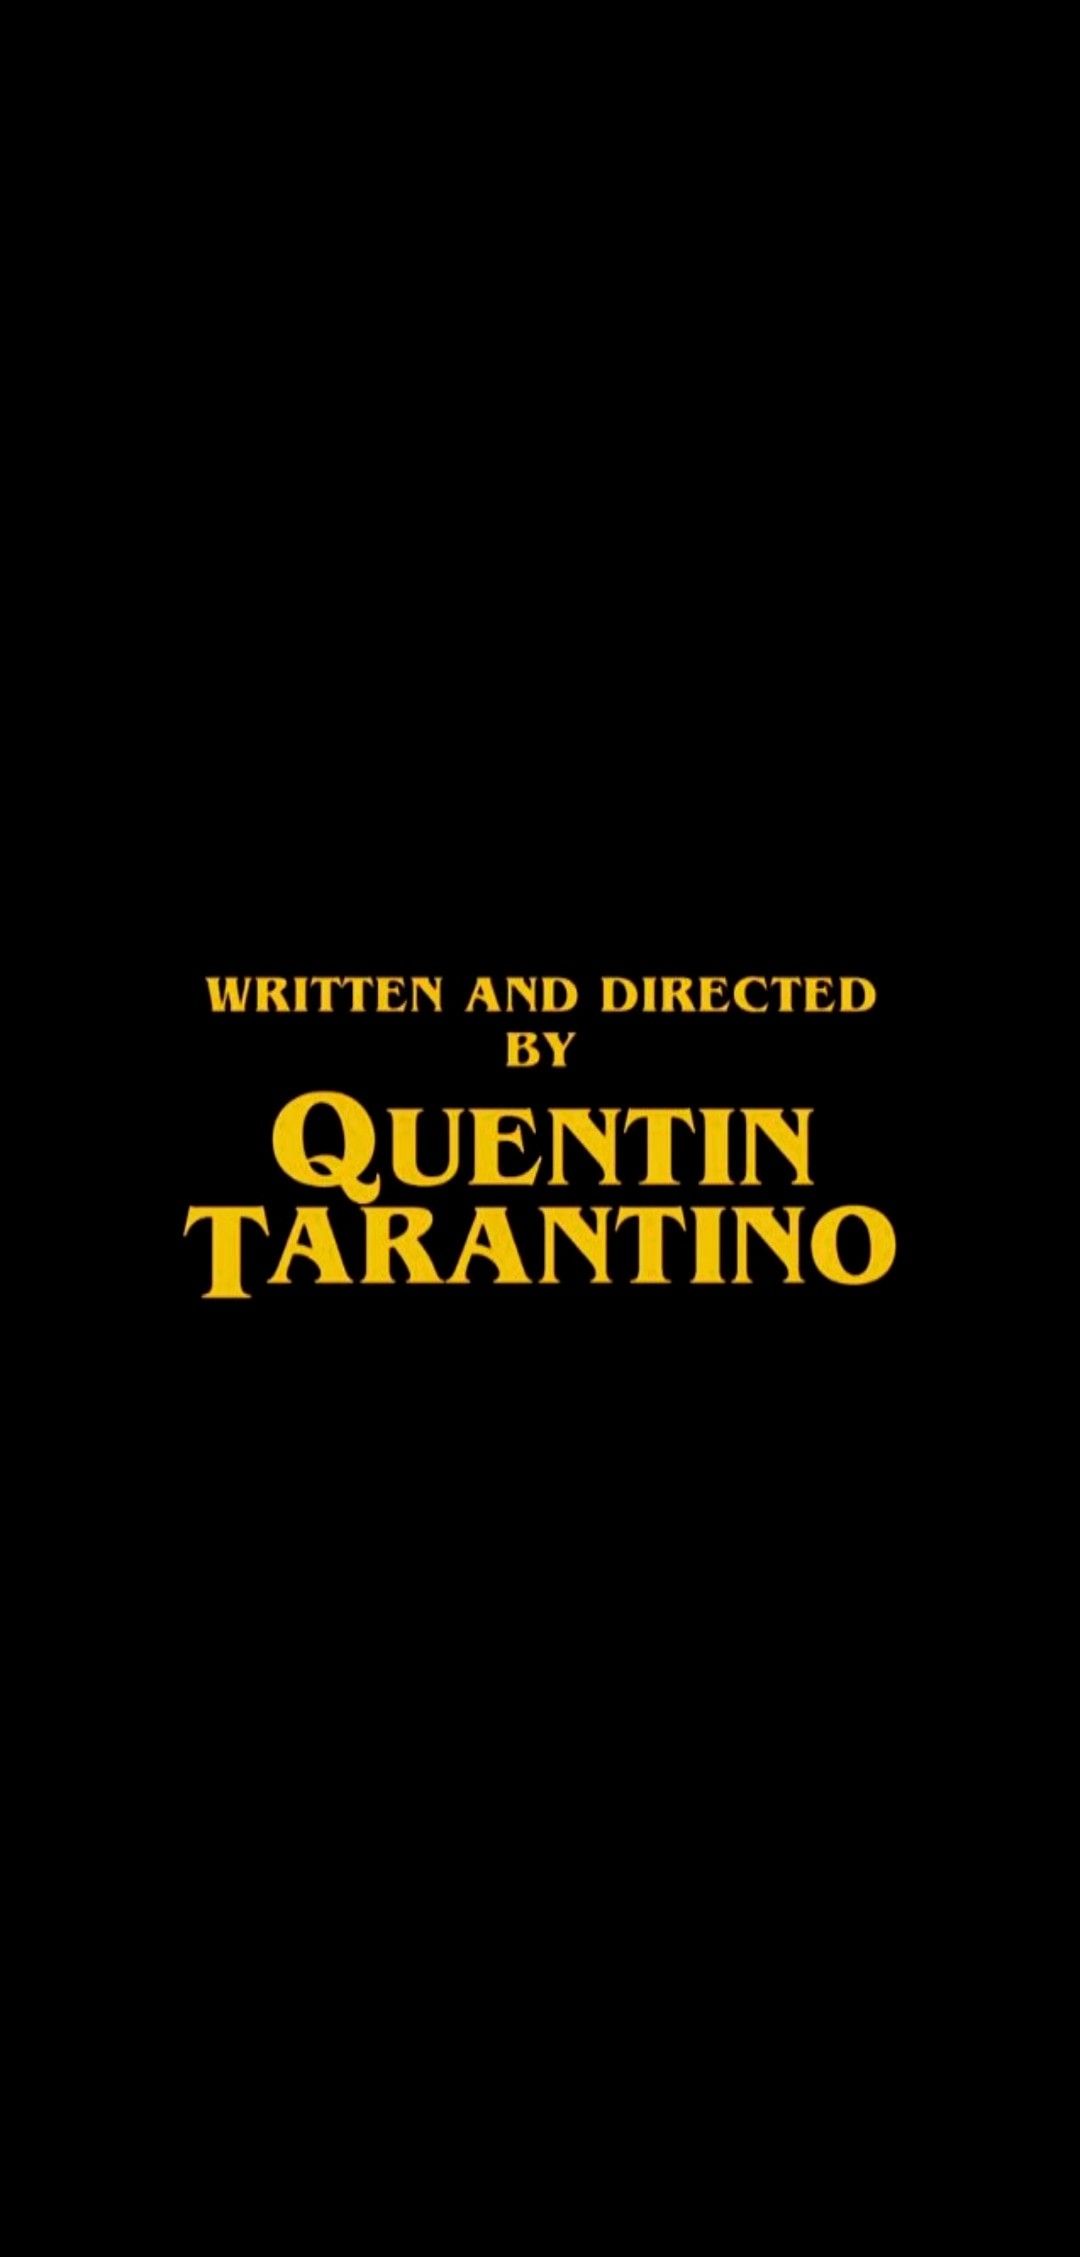 Quentin Tarantino Written And Directed By